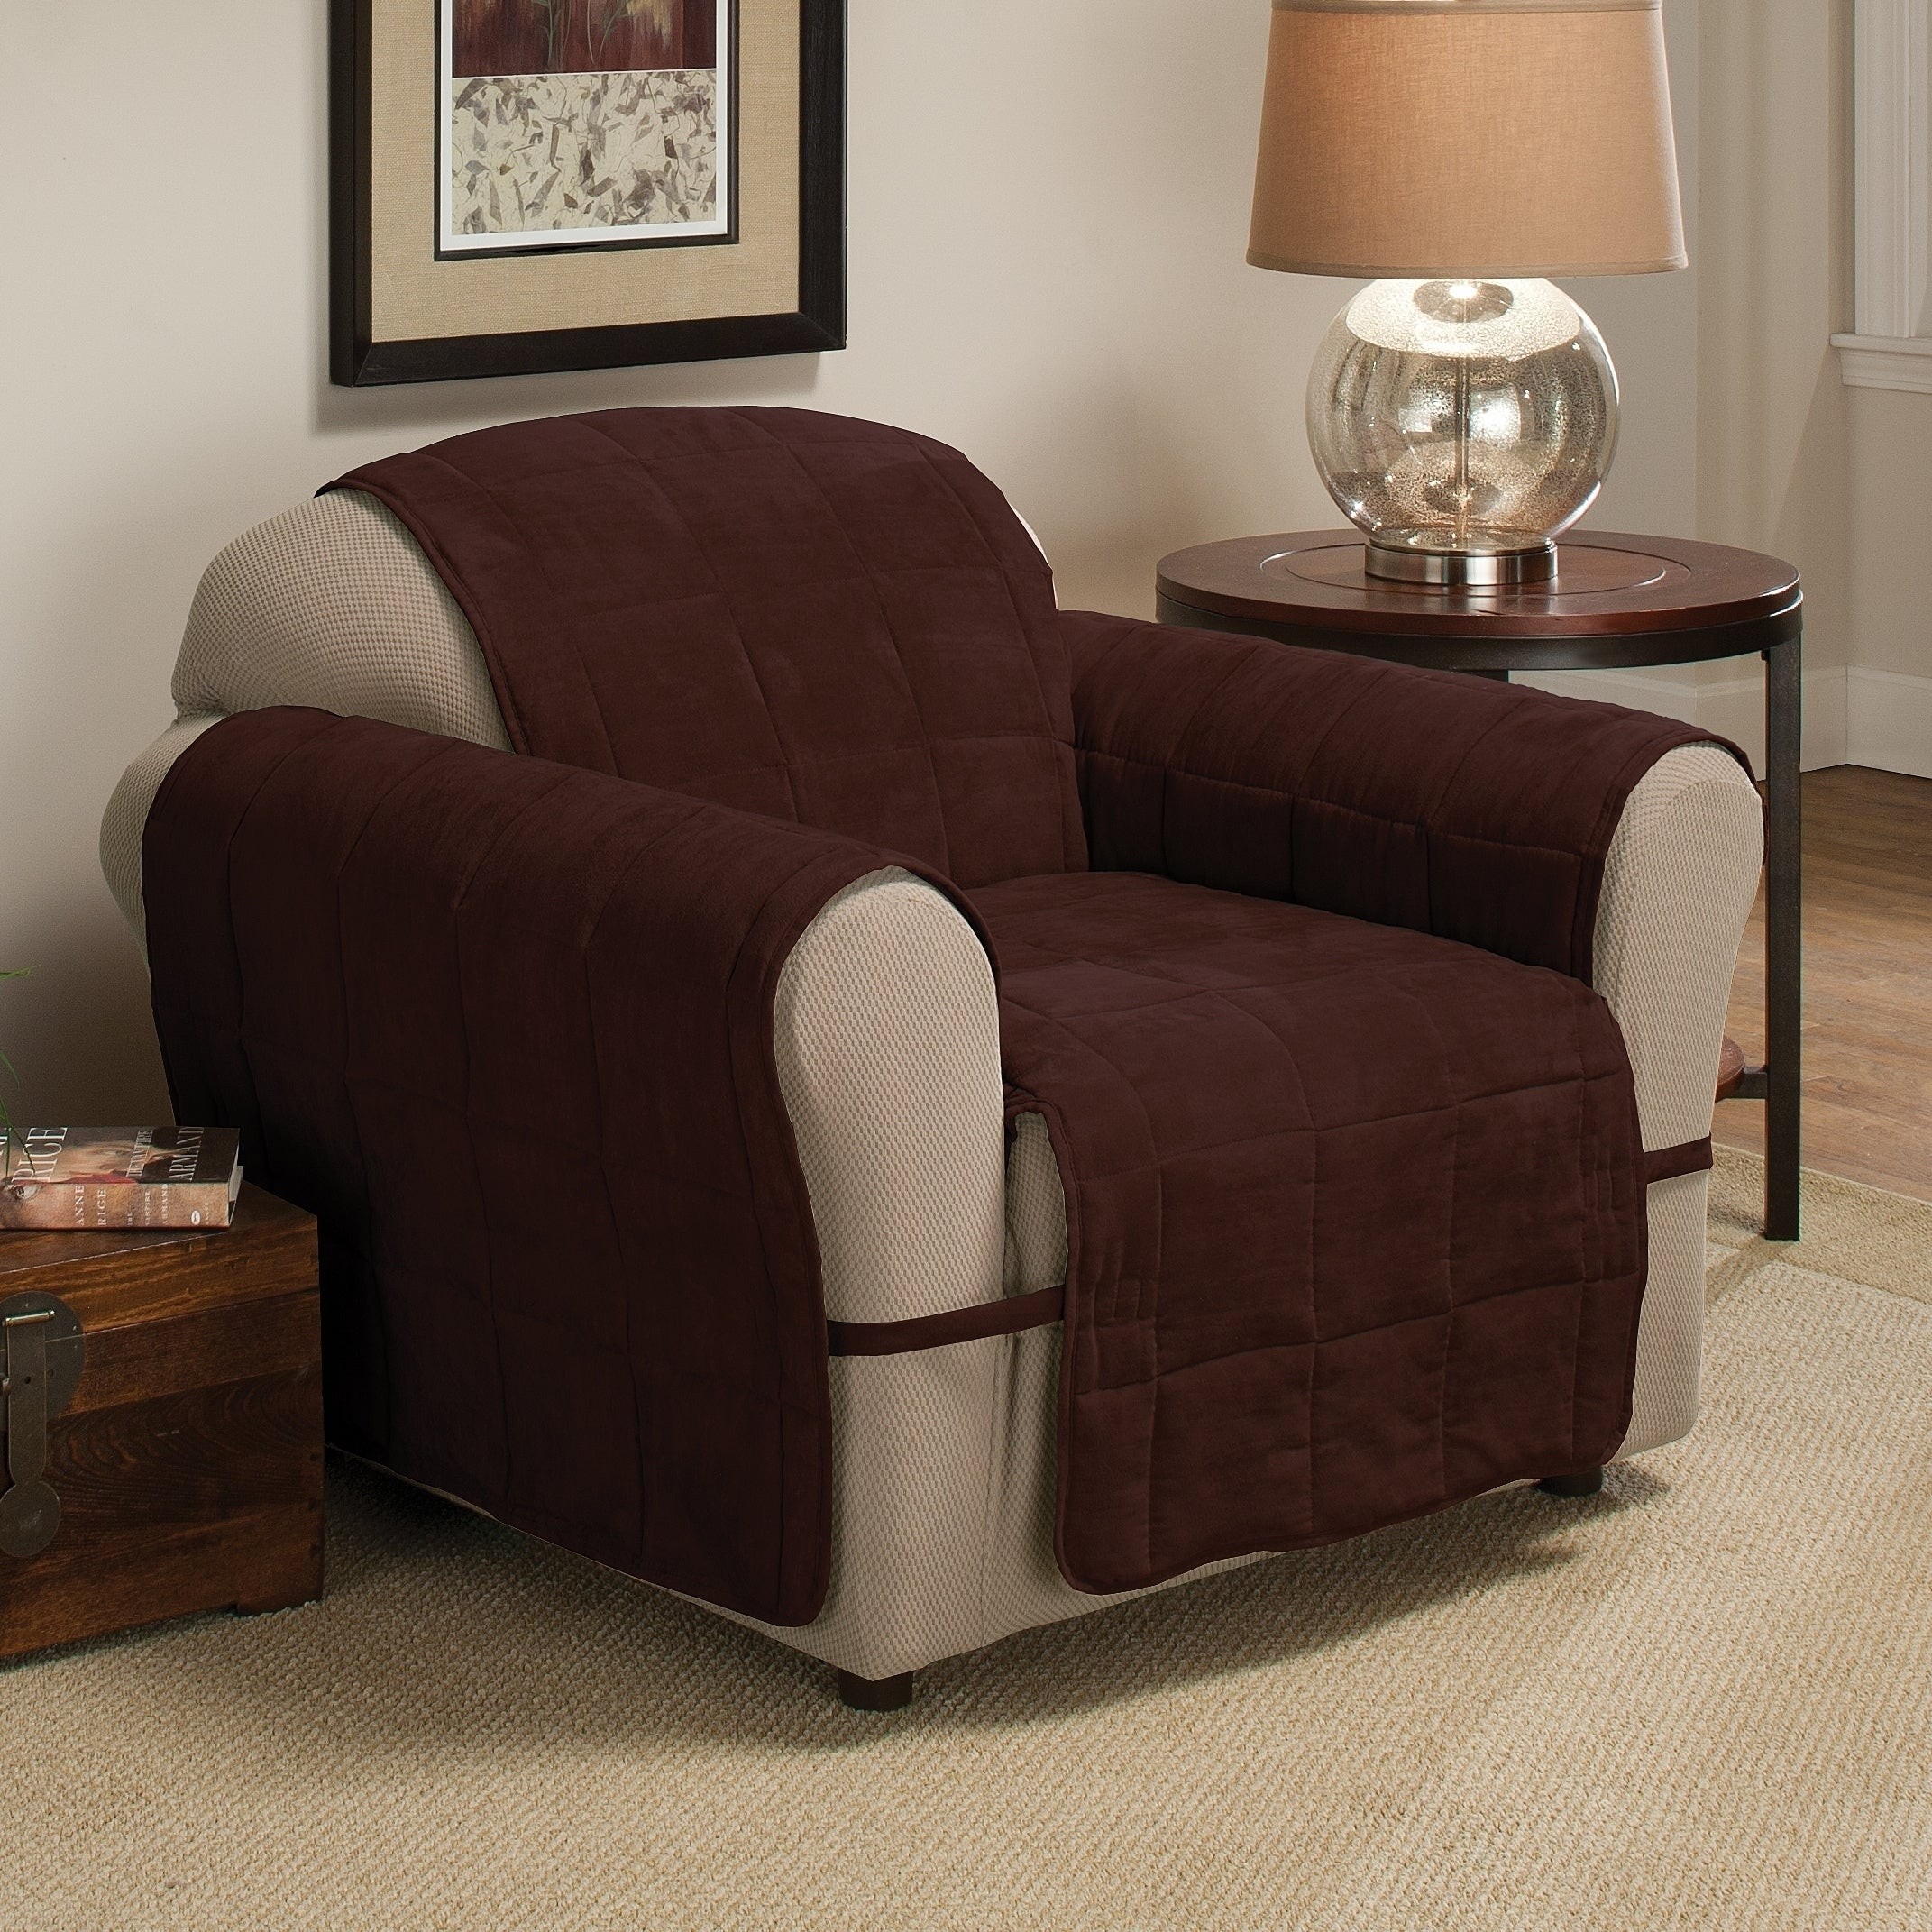 Recliner-Oversized:Charcoal//Grey Slipcovers for Recliner Recliner Covers for Large Recliner Recliner Chair Covers RHF Diamond Oversized Recliner Cover /& Oversized Recliner Covers Double Diamond